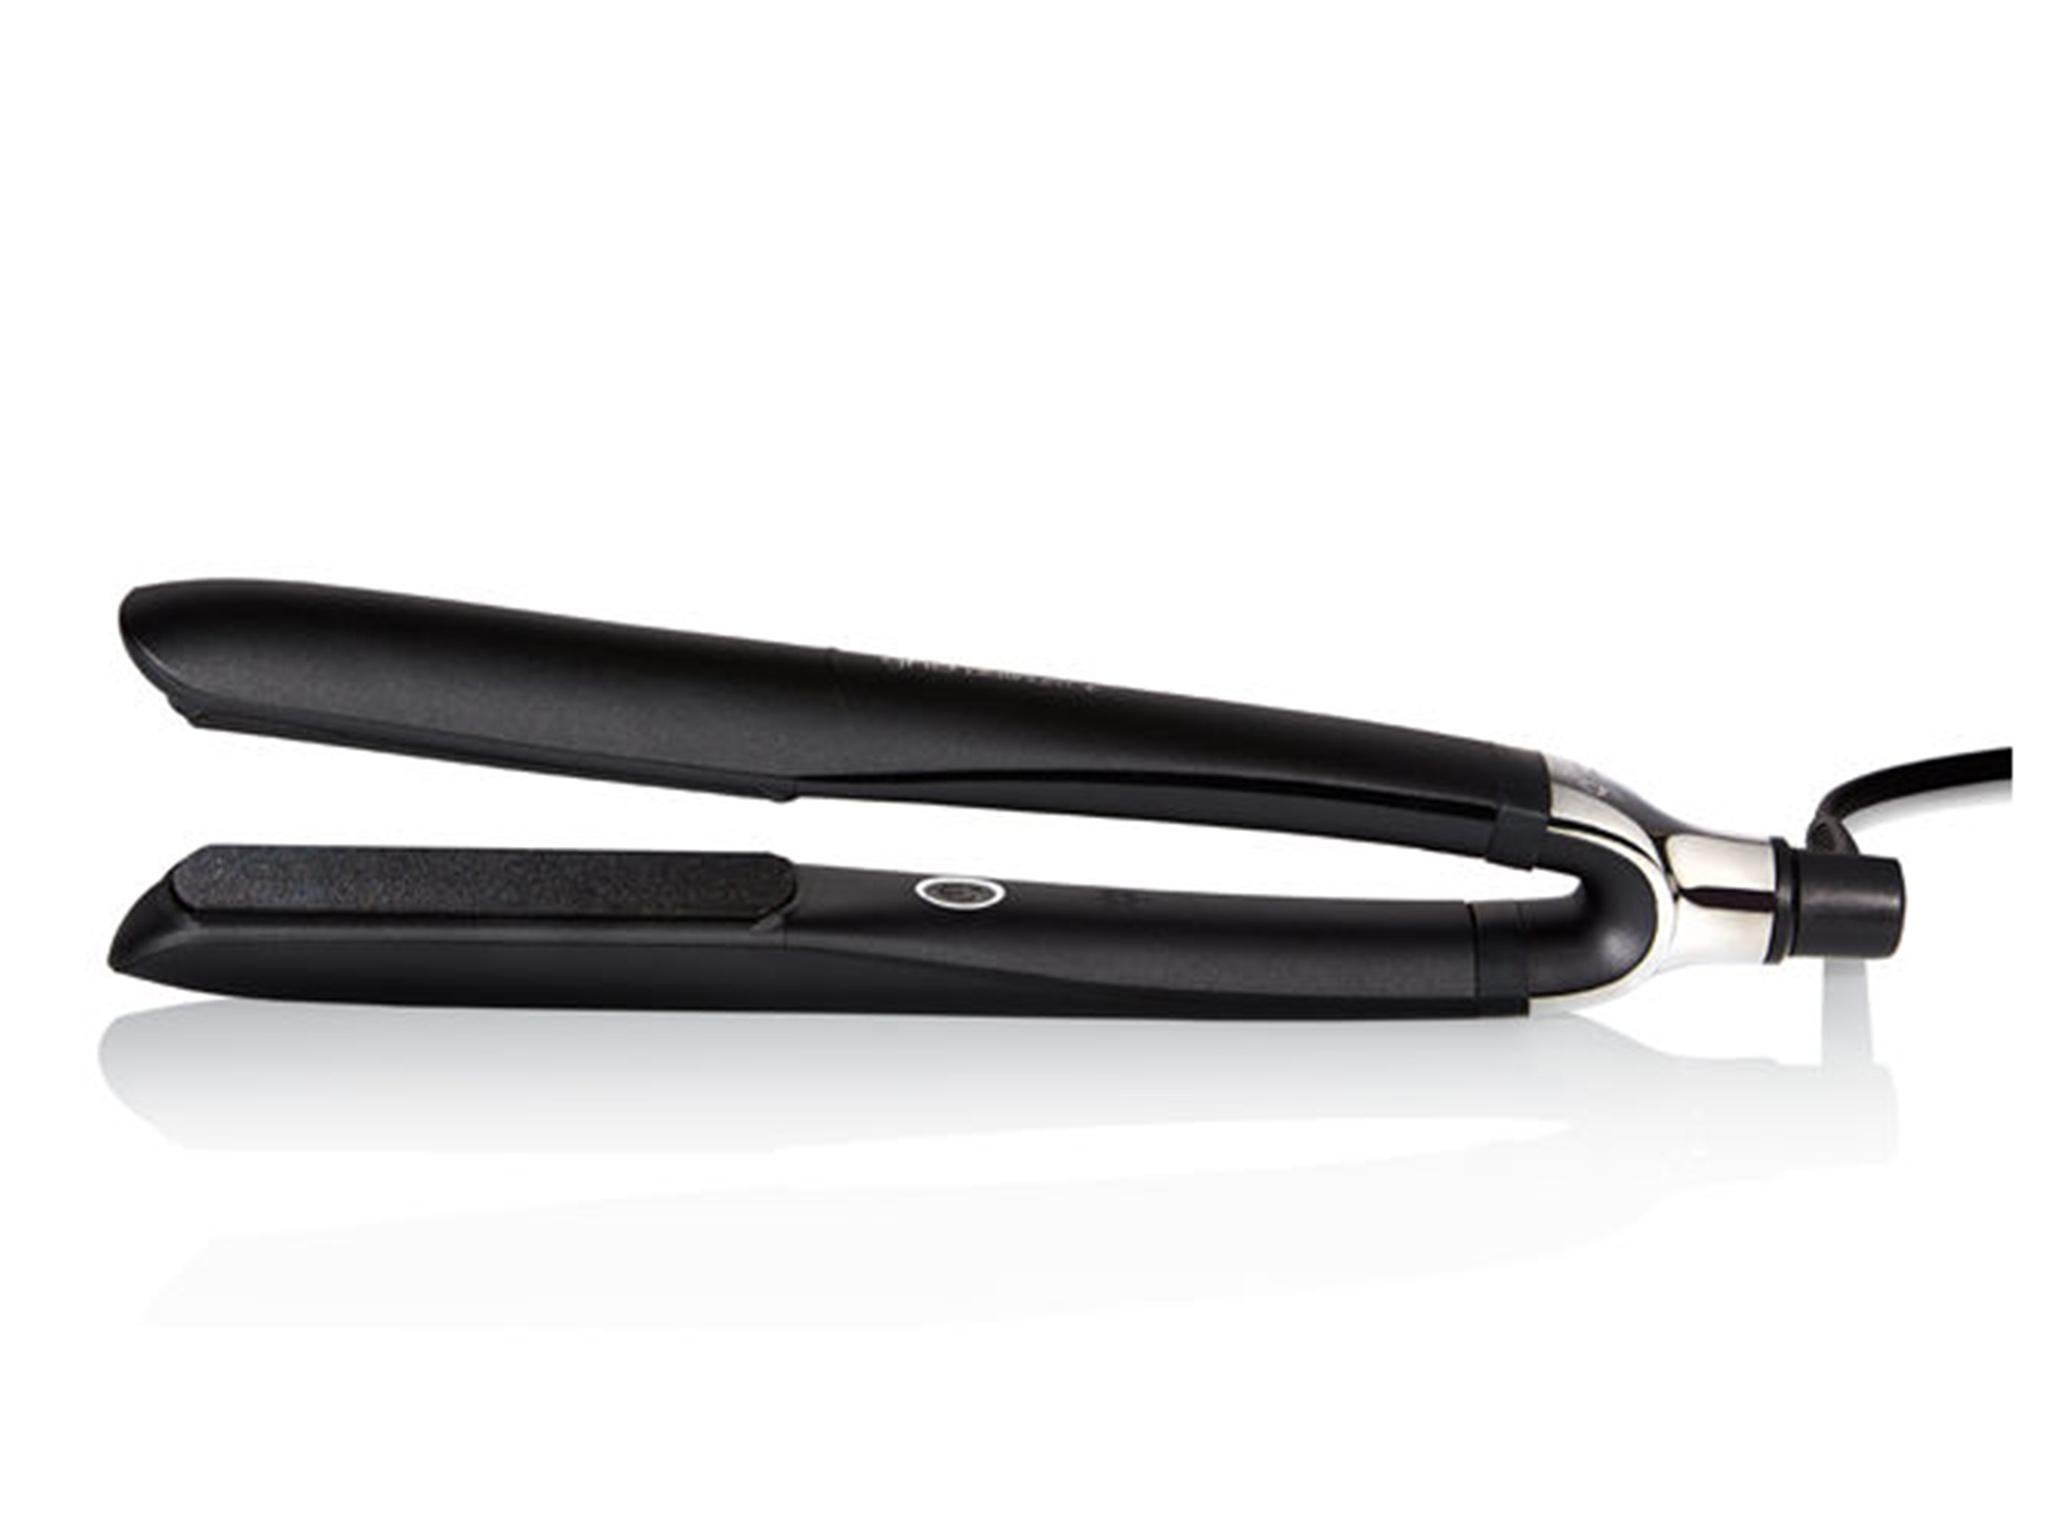 Which is worth buying? Dyson corrale or GHD platinum? : r/Sephora